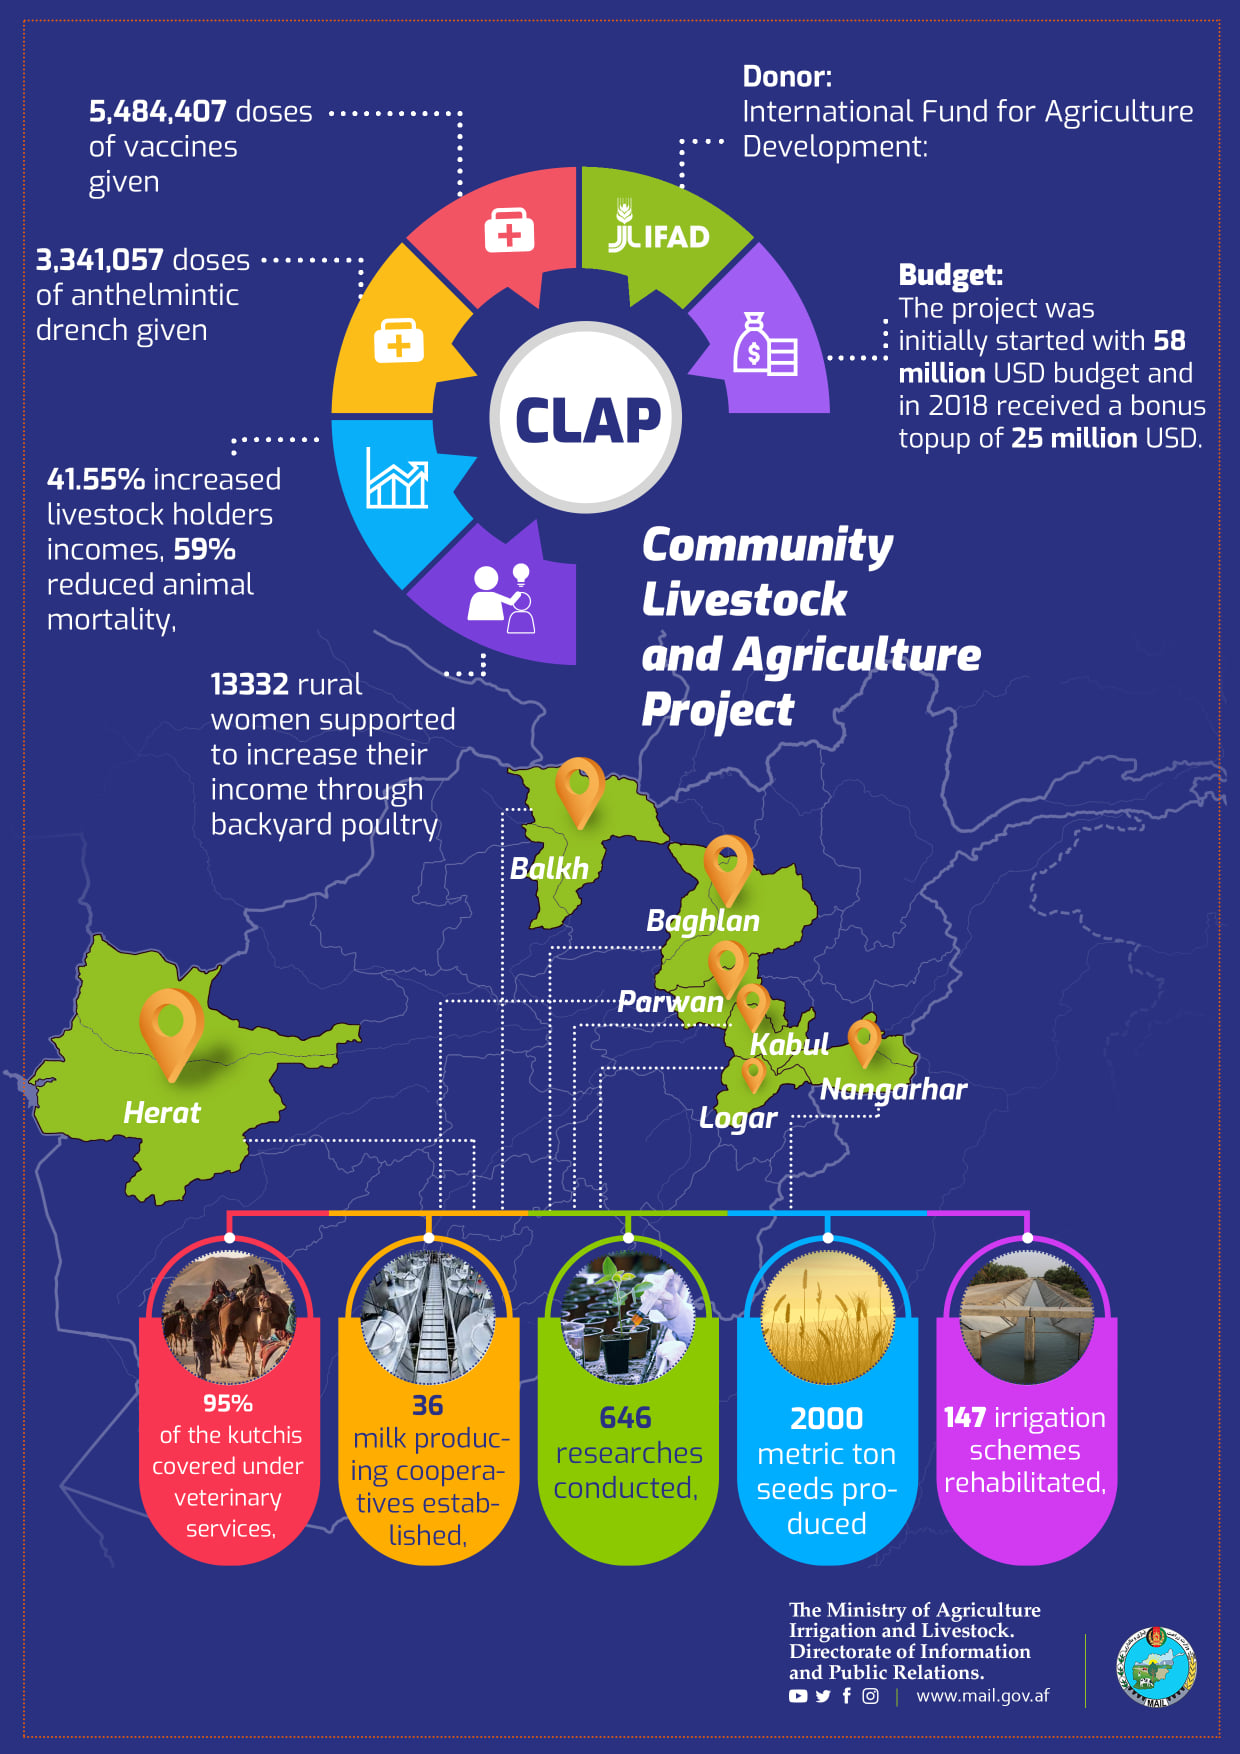 The main activities and achievements of Community Livestock and Agriculture Project (CLAP) of the Ministry of Agriculture, Irrigation and Livestock.‎